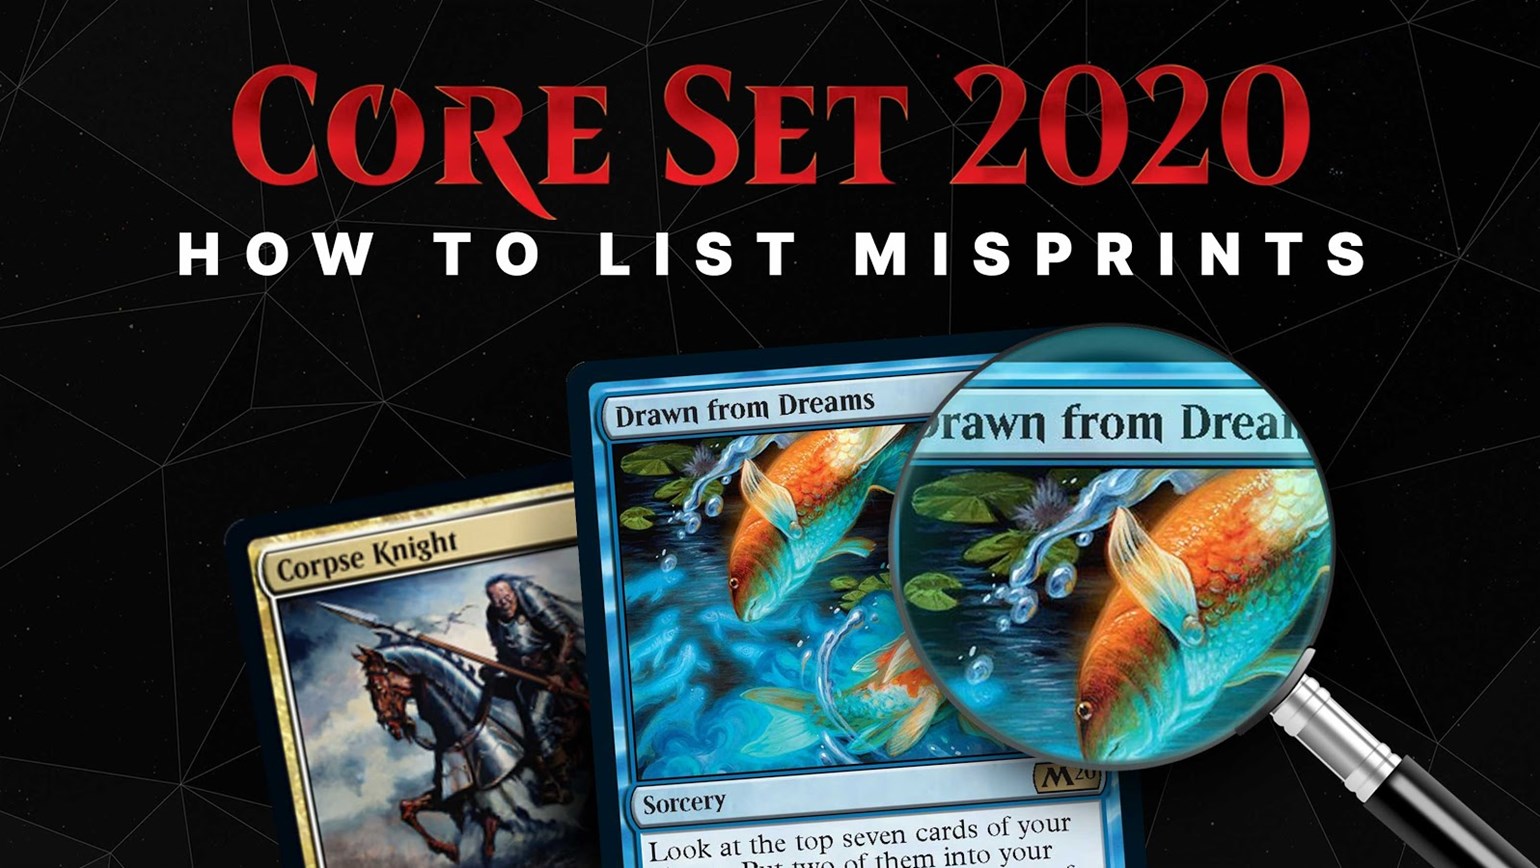 How to List Misprints from Core Set 2020